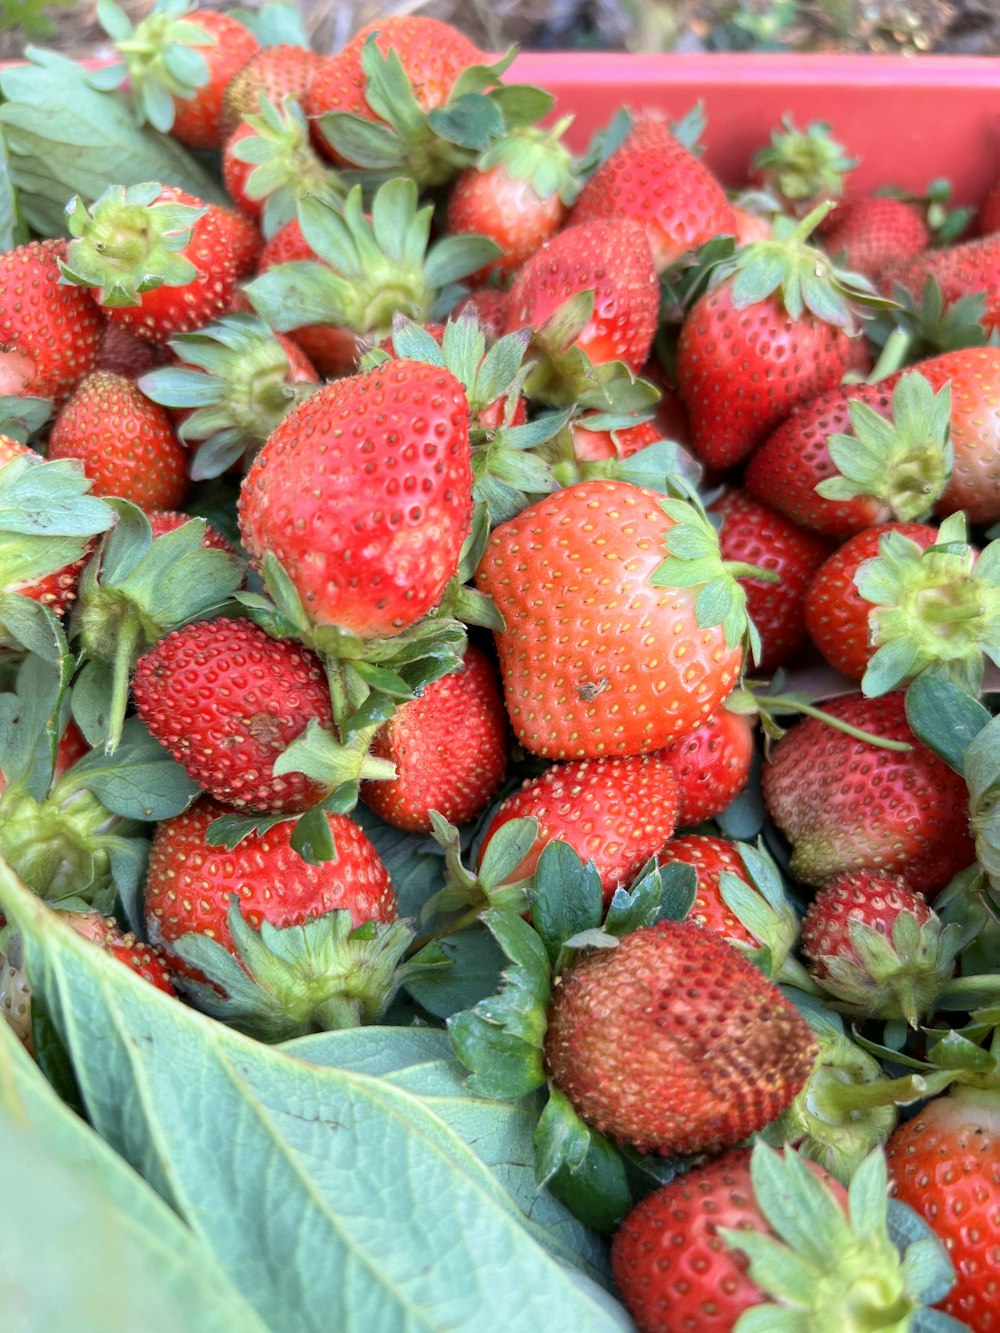 a red container filled with lots of ripe strawberries